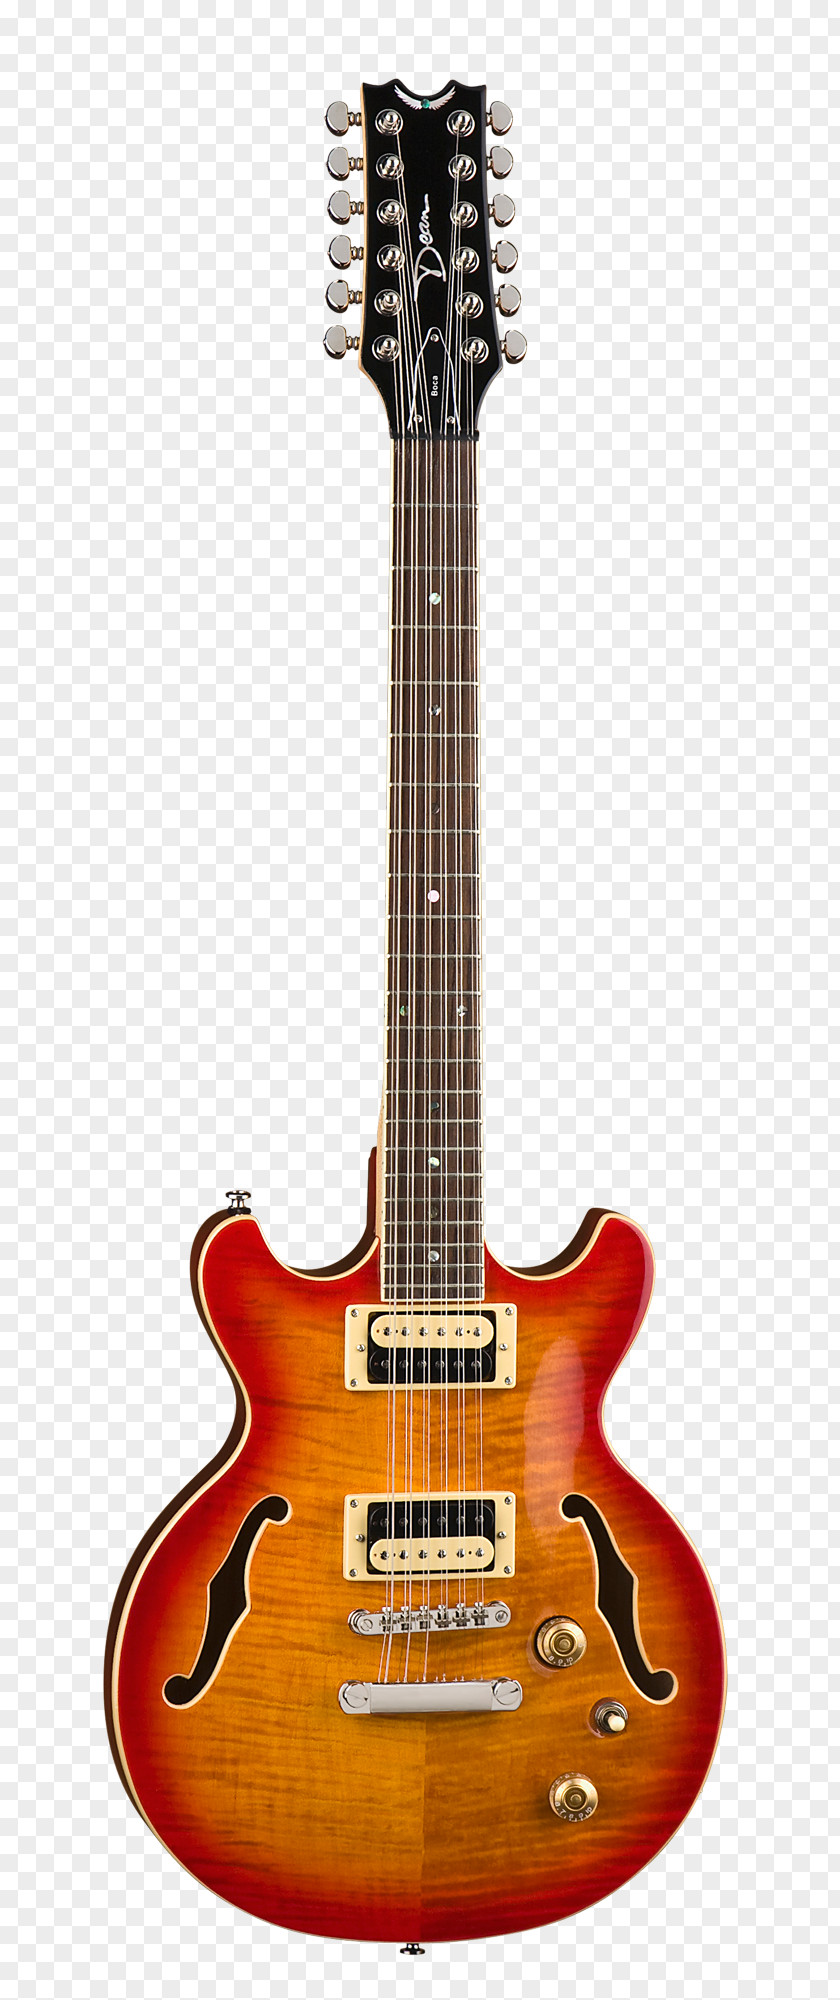 Electric Guitar Twelve-string Dean Guitars Solid Body Archtop PNG